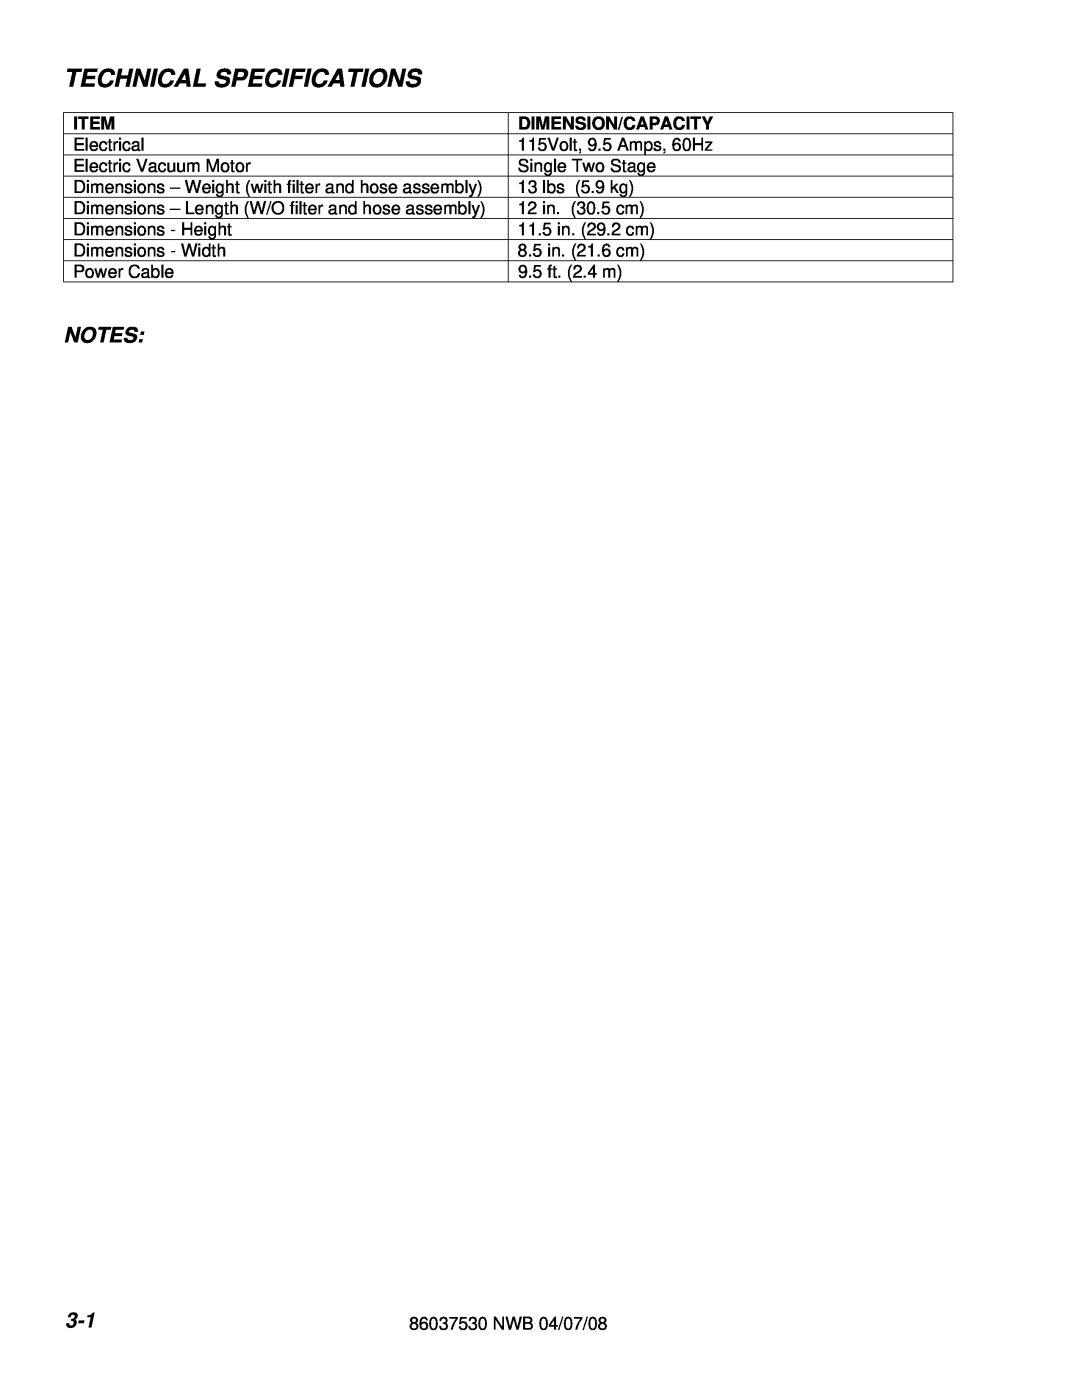 Windsor NWB 86284220 manual Technical Specifications, Dimension/Capacity 